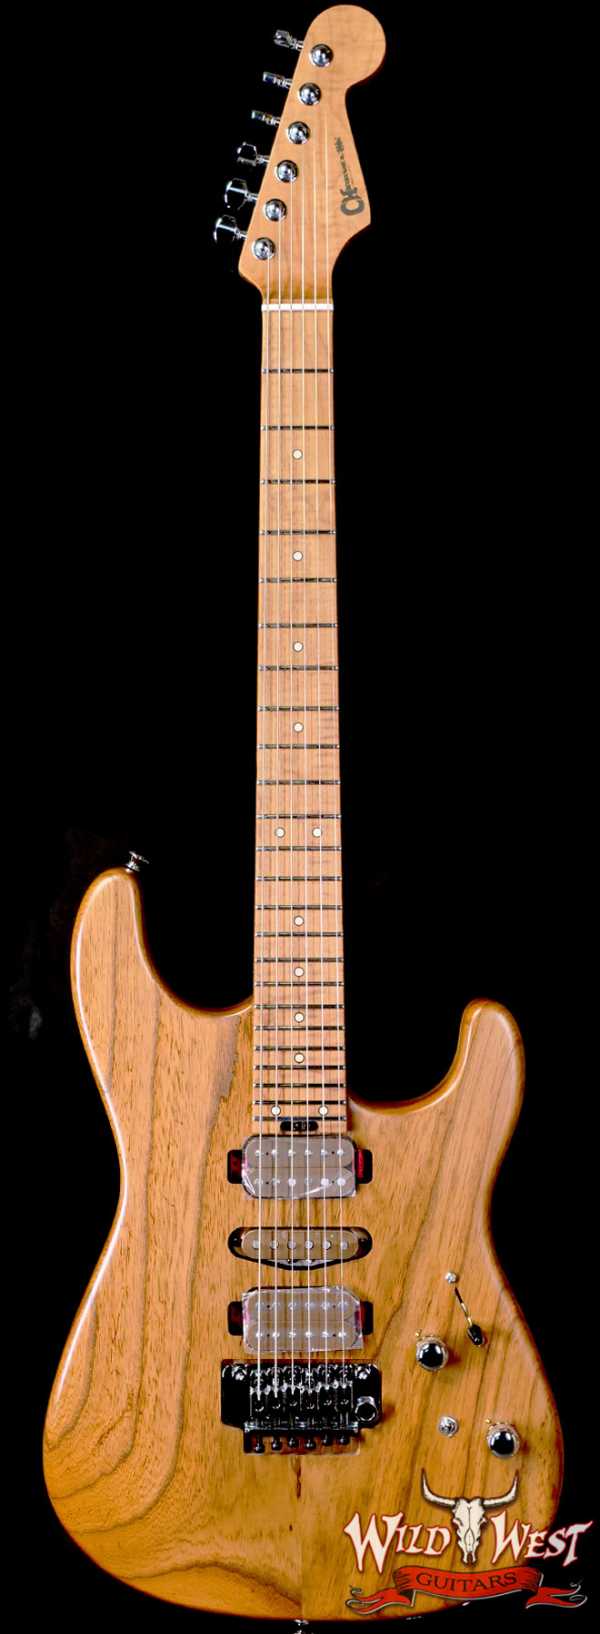 Charvel Custom Shop Guthrie Govan USA Signature HSH Caramelized Ash Body Caramelized Flame Maple Fingerboard Natural 7.30 LBS